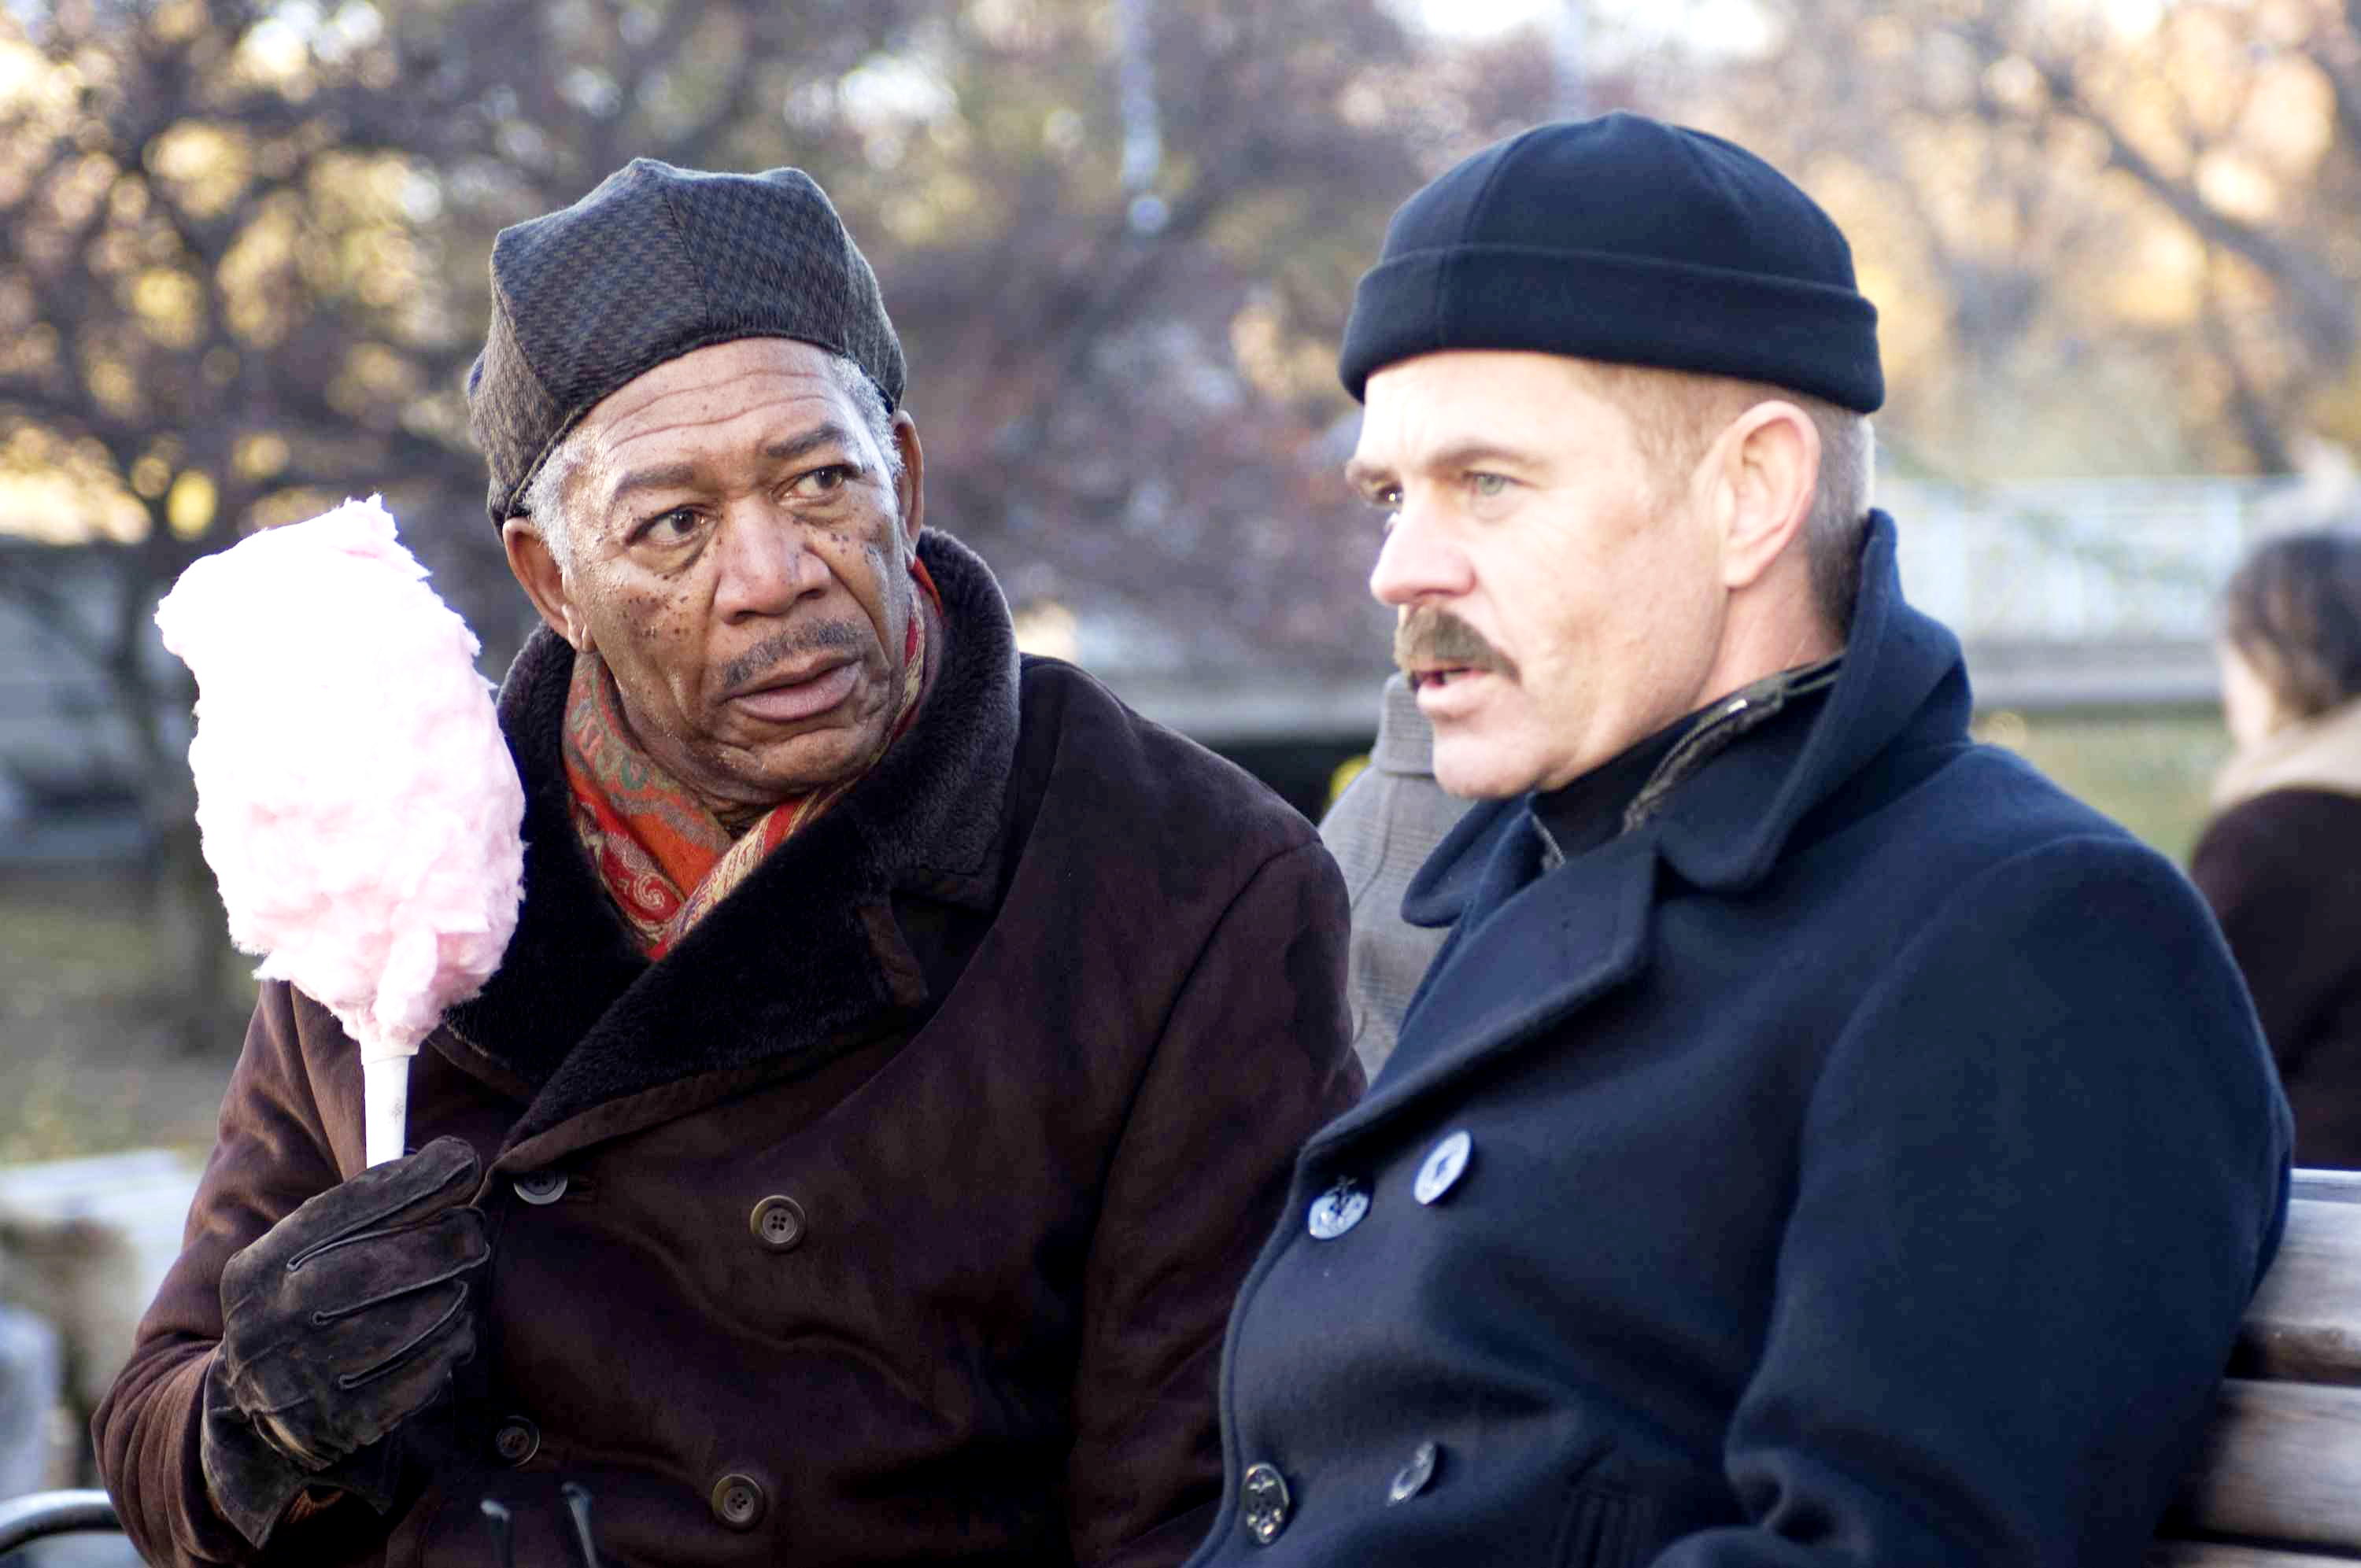 Morgan Freeman stars as Charles and William H. Macy stars as George in Sony Pictures Home Entertainment's The Maiden Heist (2009)